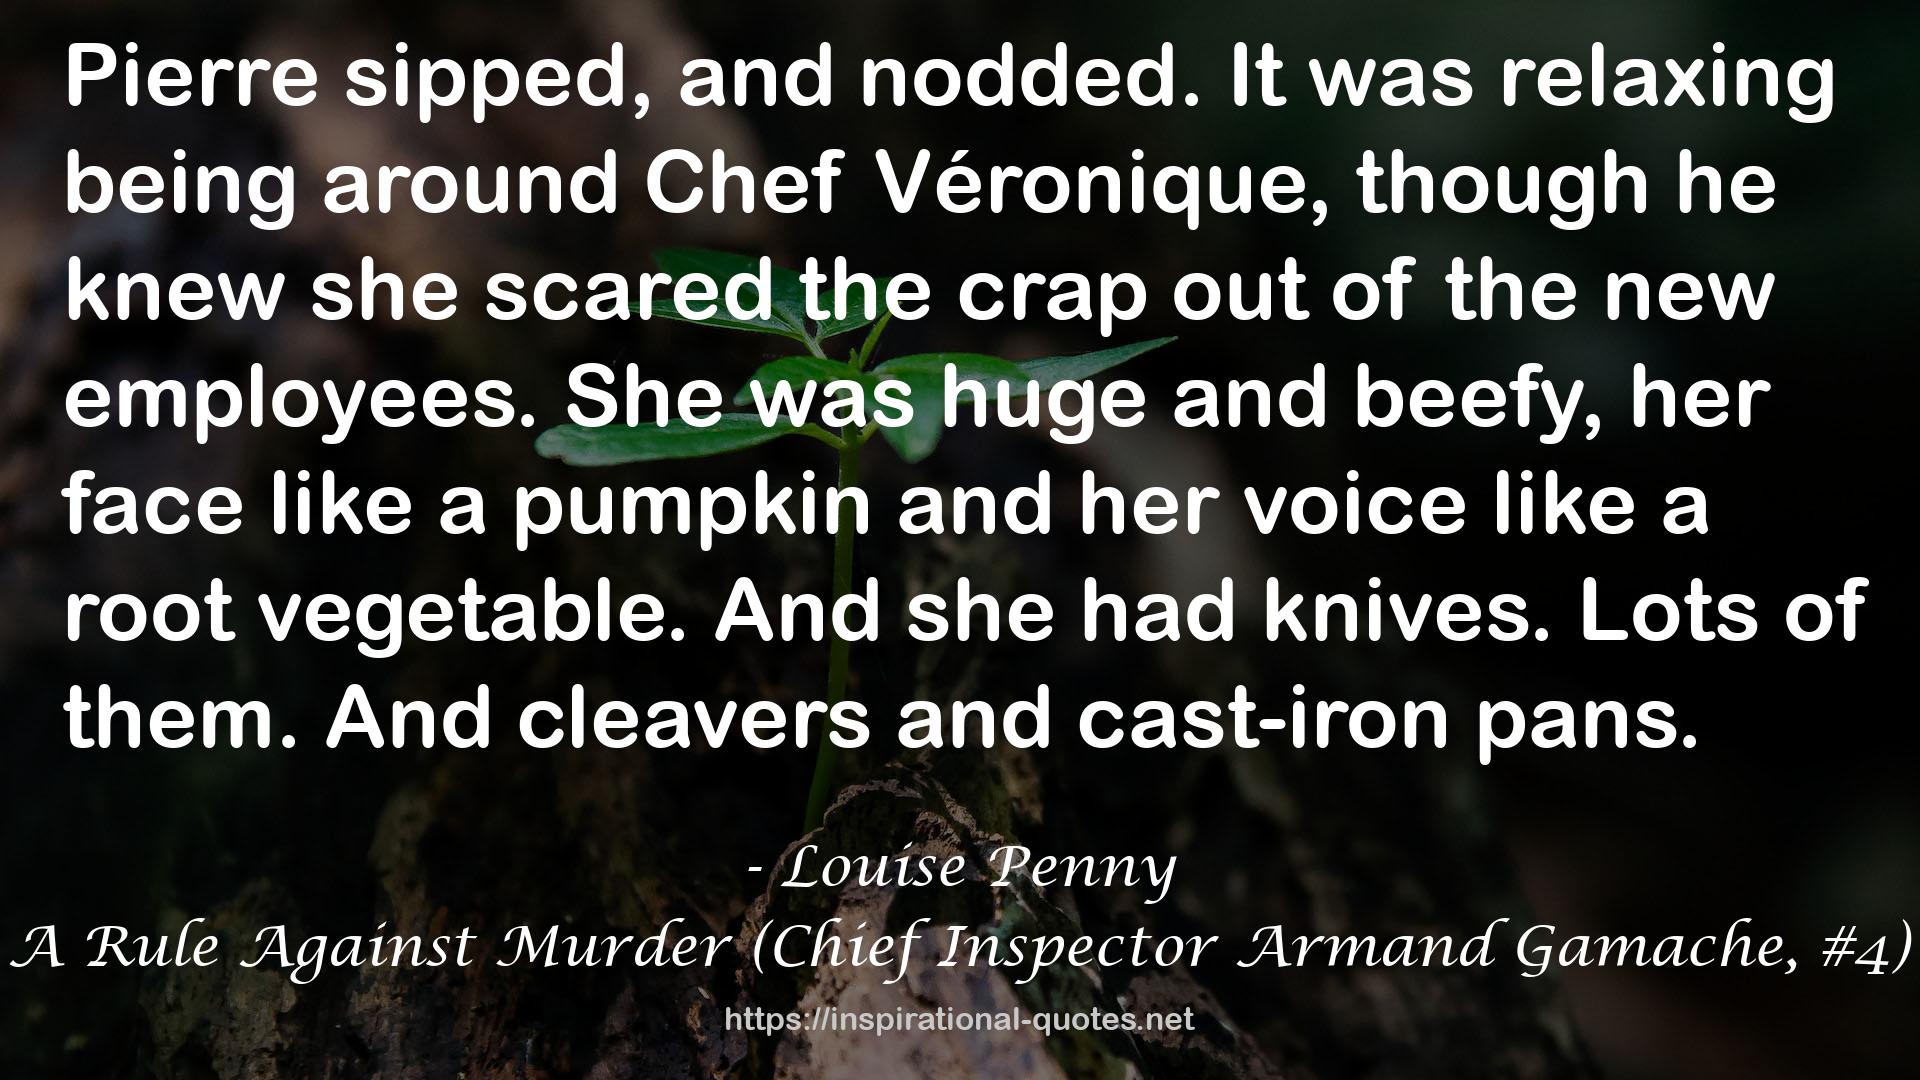 A Rule Against Murder (Chief Inspector Armand Gamache, #4) QUOTES